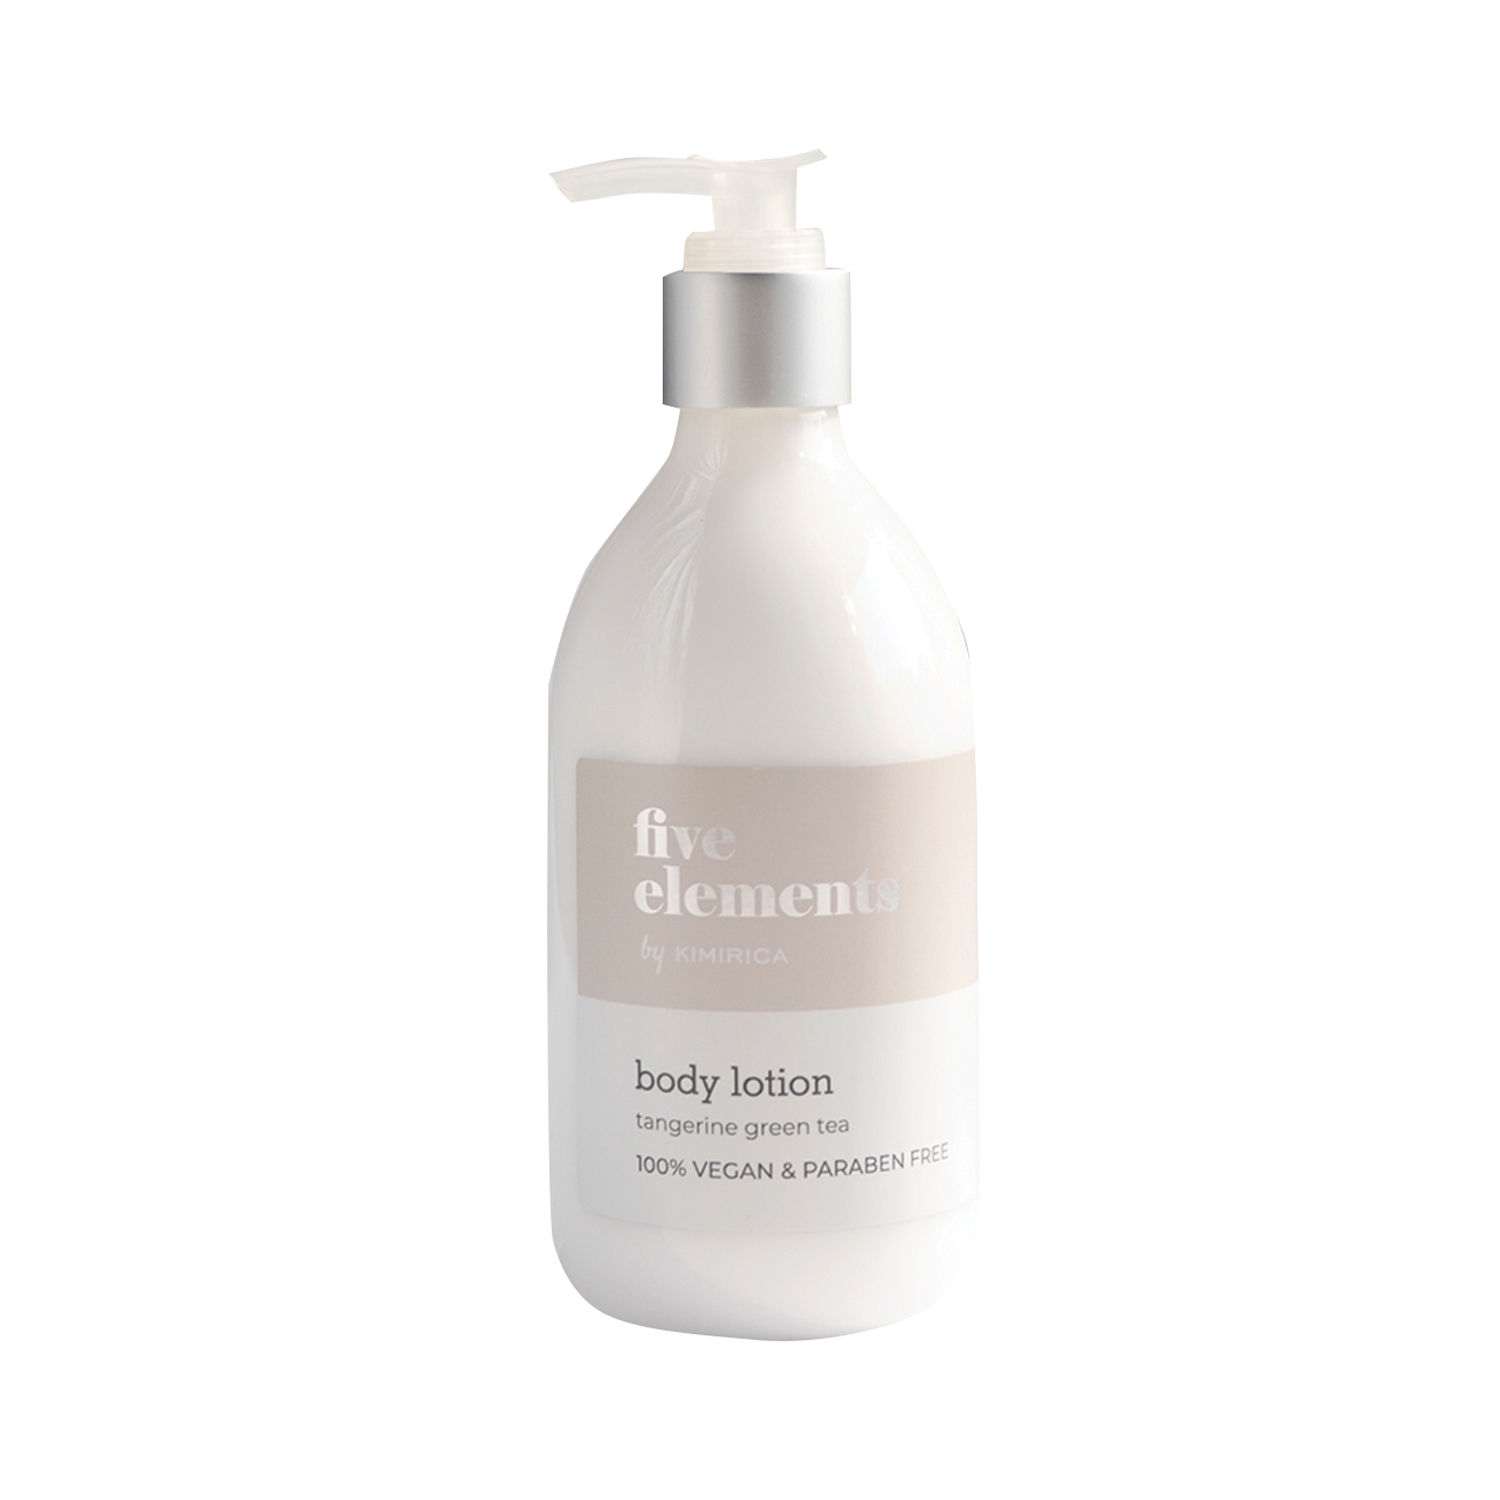 Kimirica Five Elements Body Lotion with Tangerine & Green Tea for All Skin Type Hydrating (300 ml)